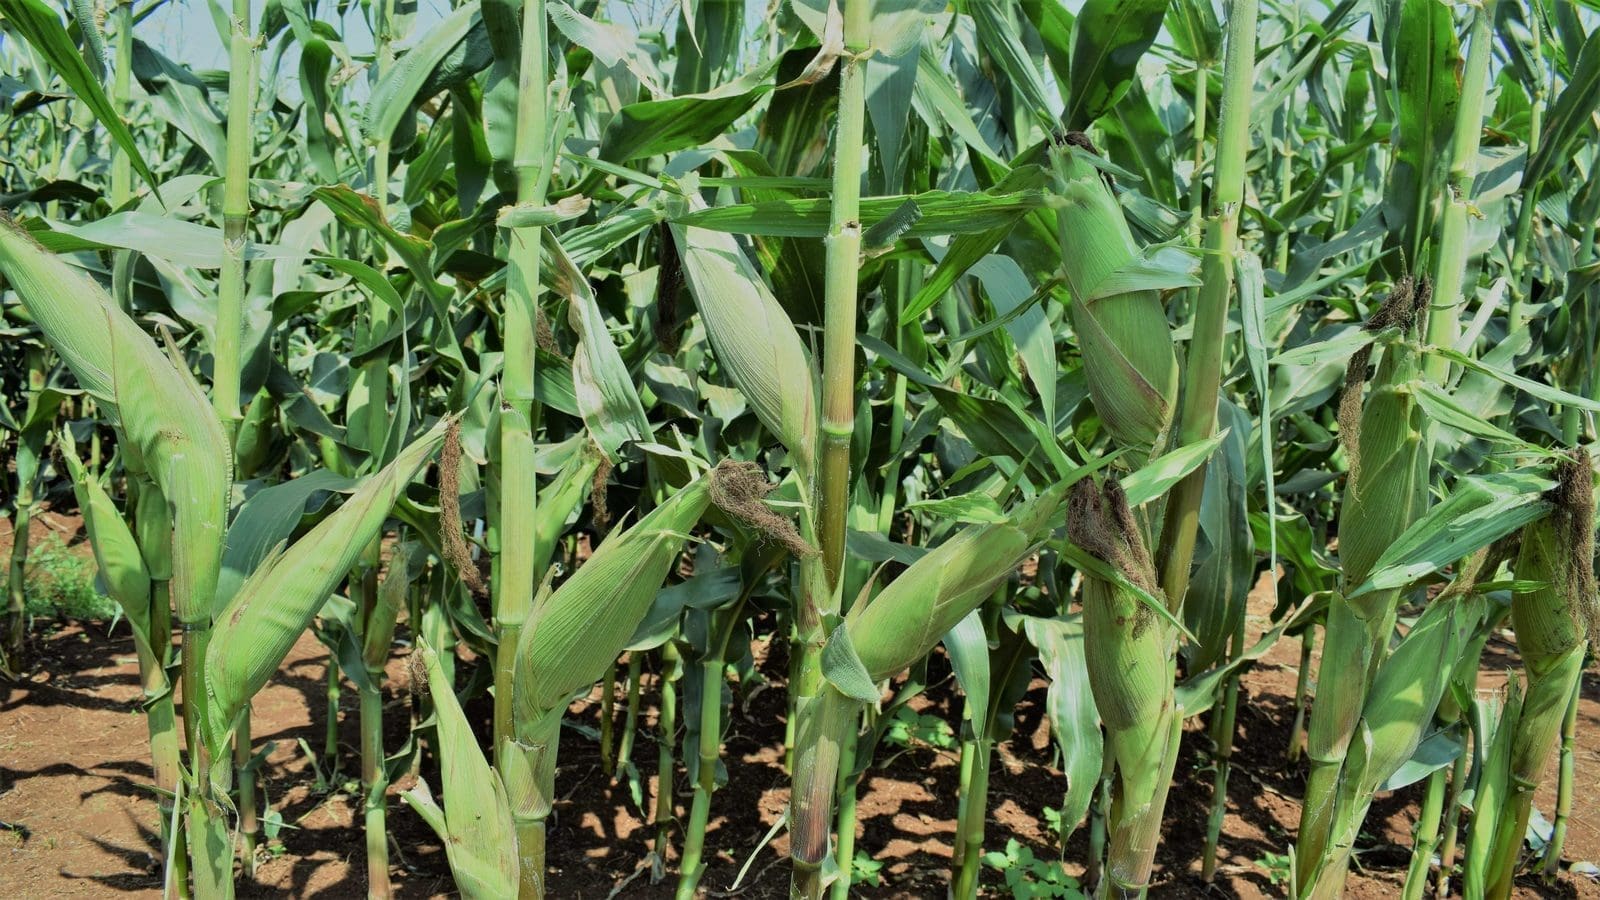 Nigeria consents open cultivation of genetically modified TELA maize